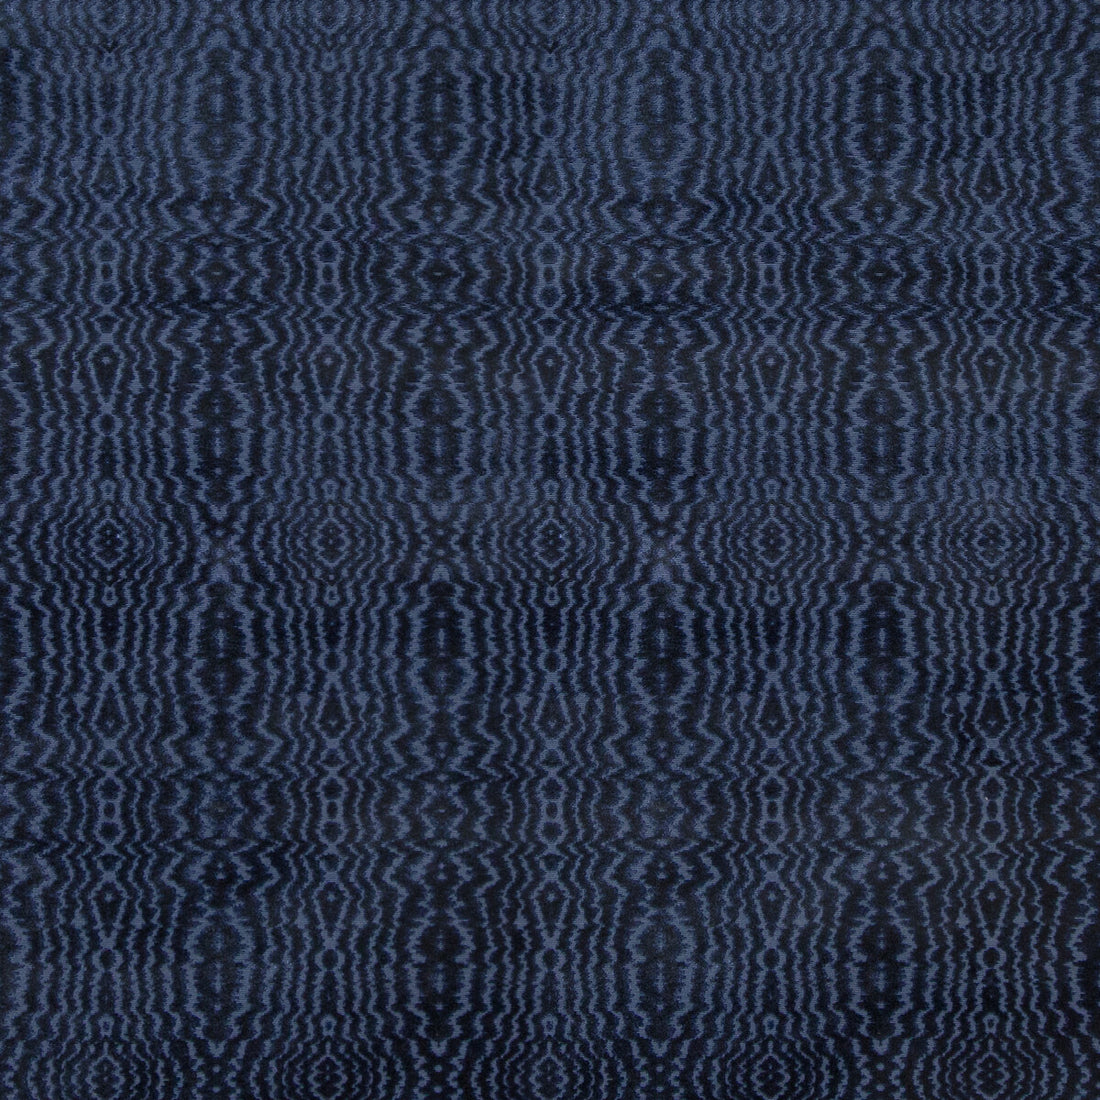 Callow Velvet fabric in midnight color - pattern 2019119.505.0 - by Lee Jofa in the Harlington Velvets collection